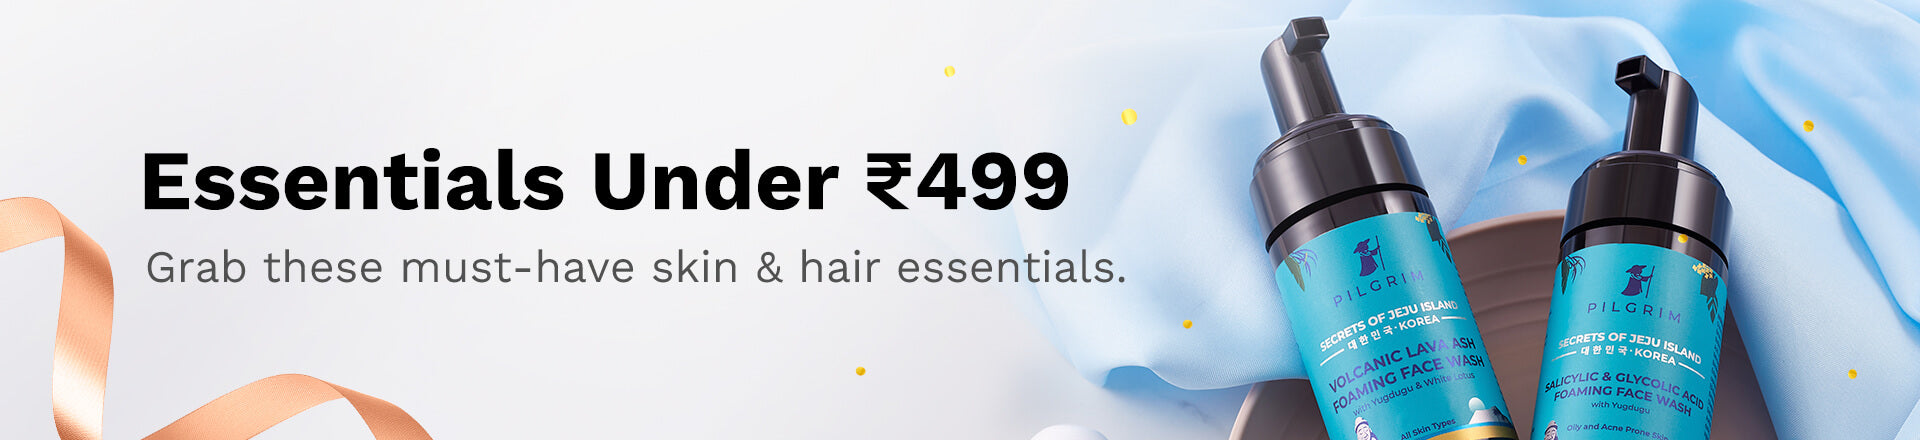 Products under ₹499